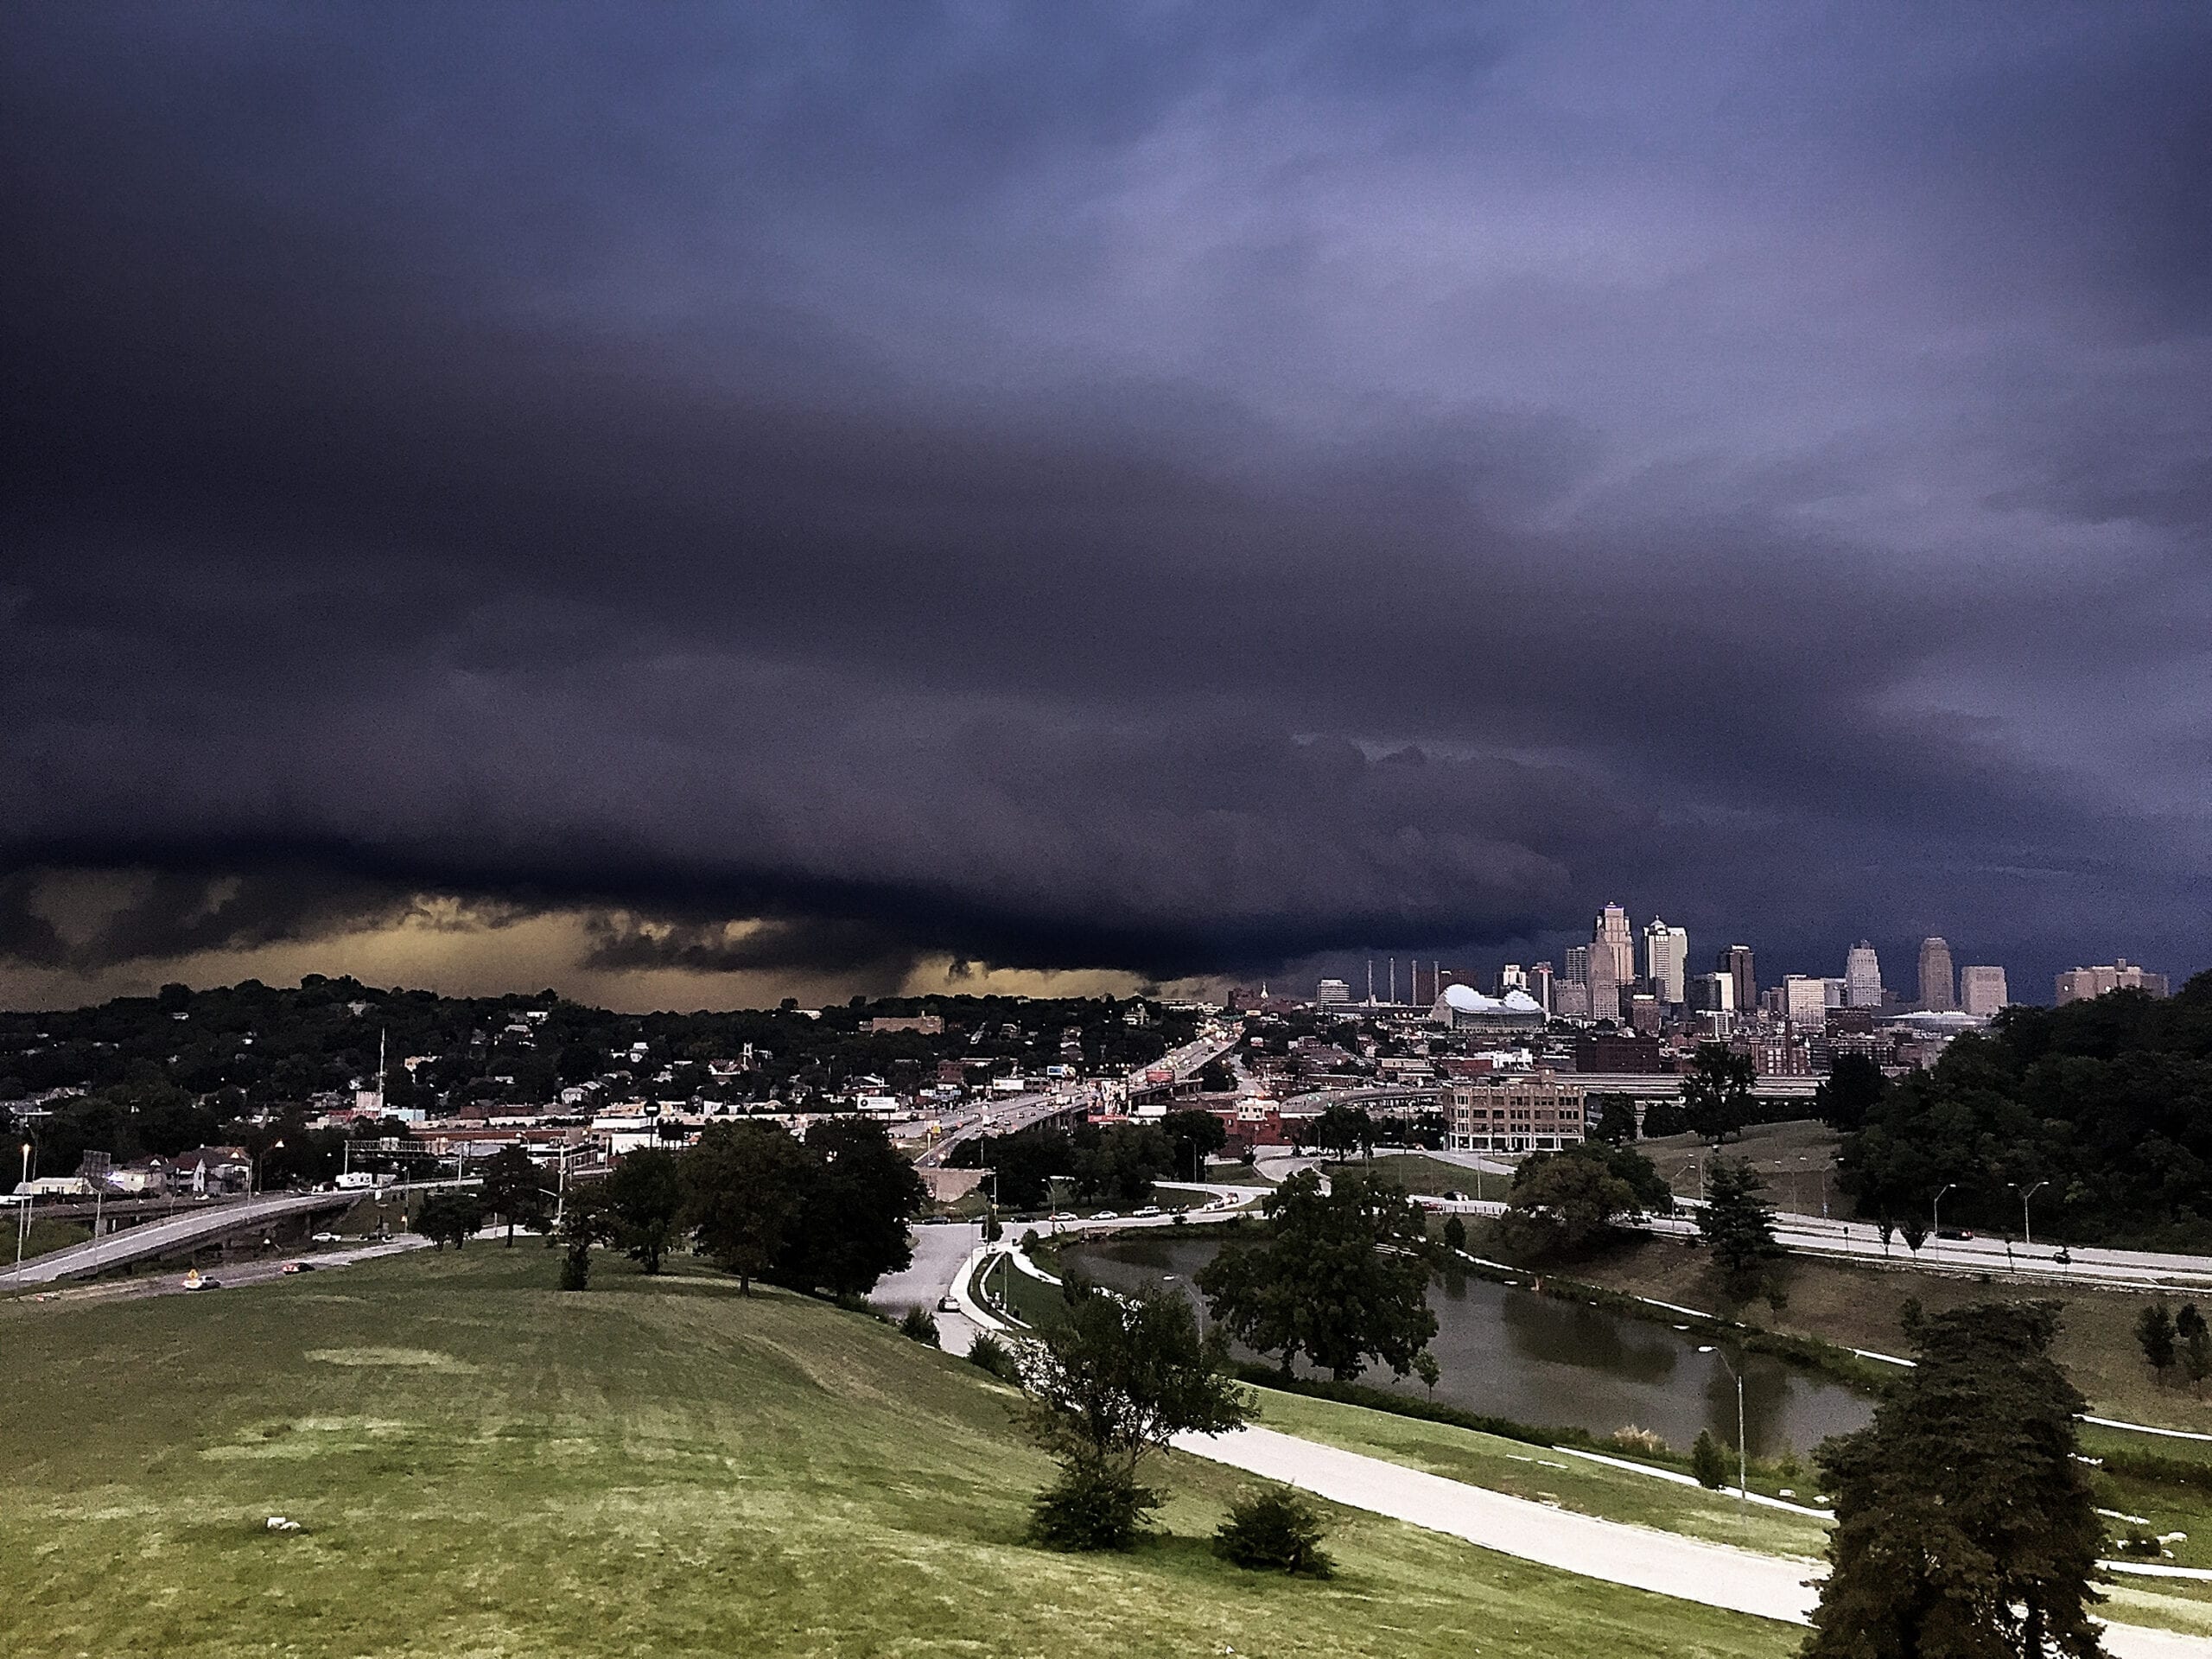 A storm rolls in over Kansas City. RDM's Insurance Law team handles insurance coverage issues, subrogation, bad faith claims, and more.